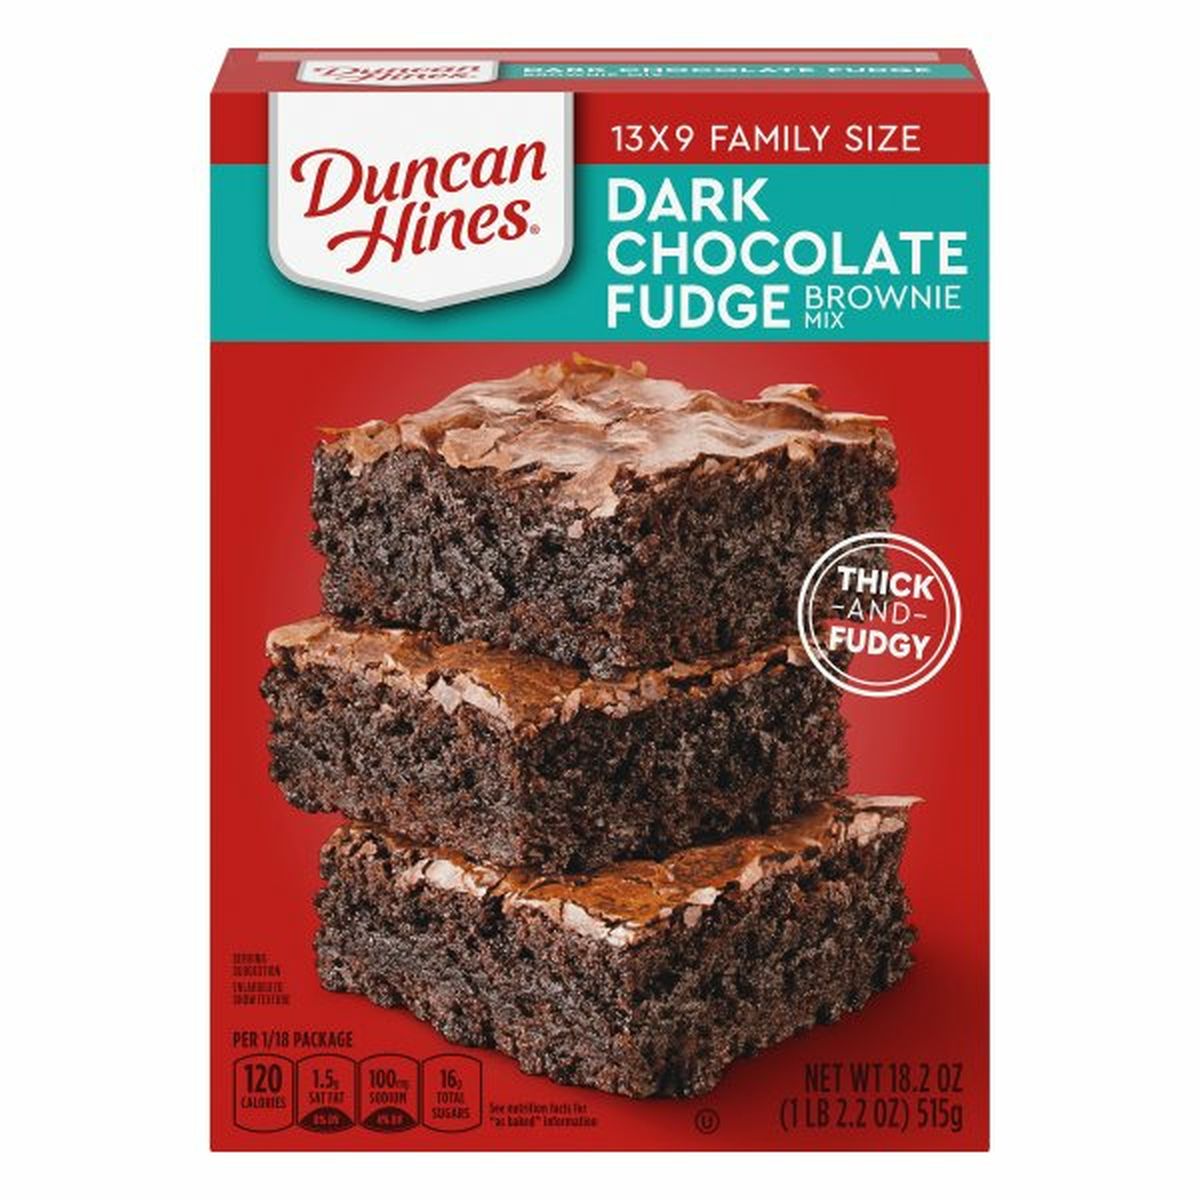 Calories in Duncan Hines Brownie Mix, Dark Chocolate Fudge, Family Size